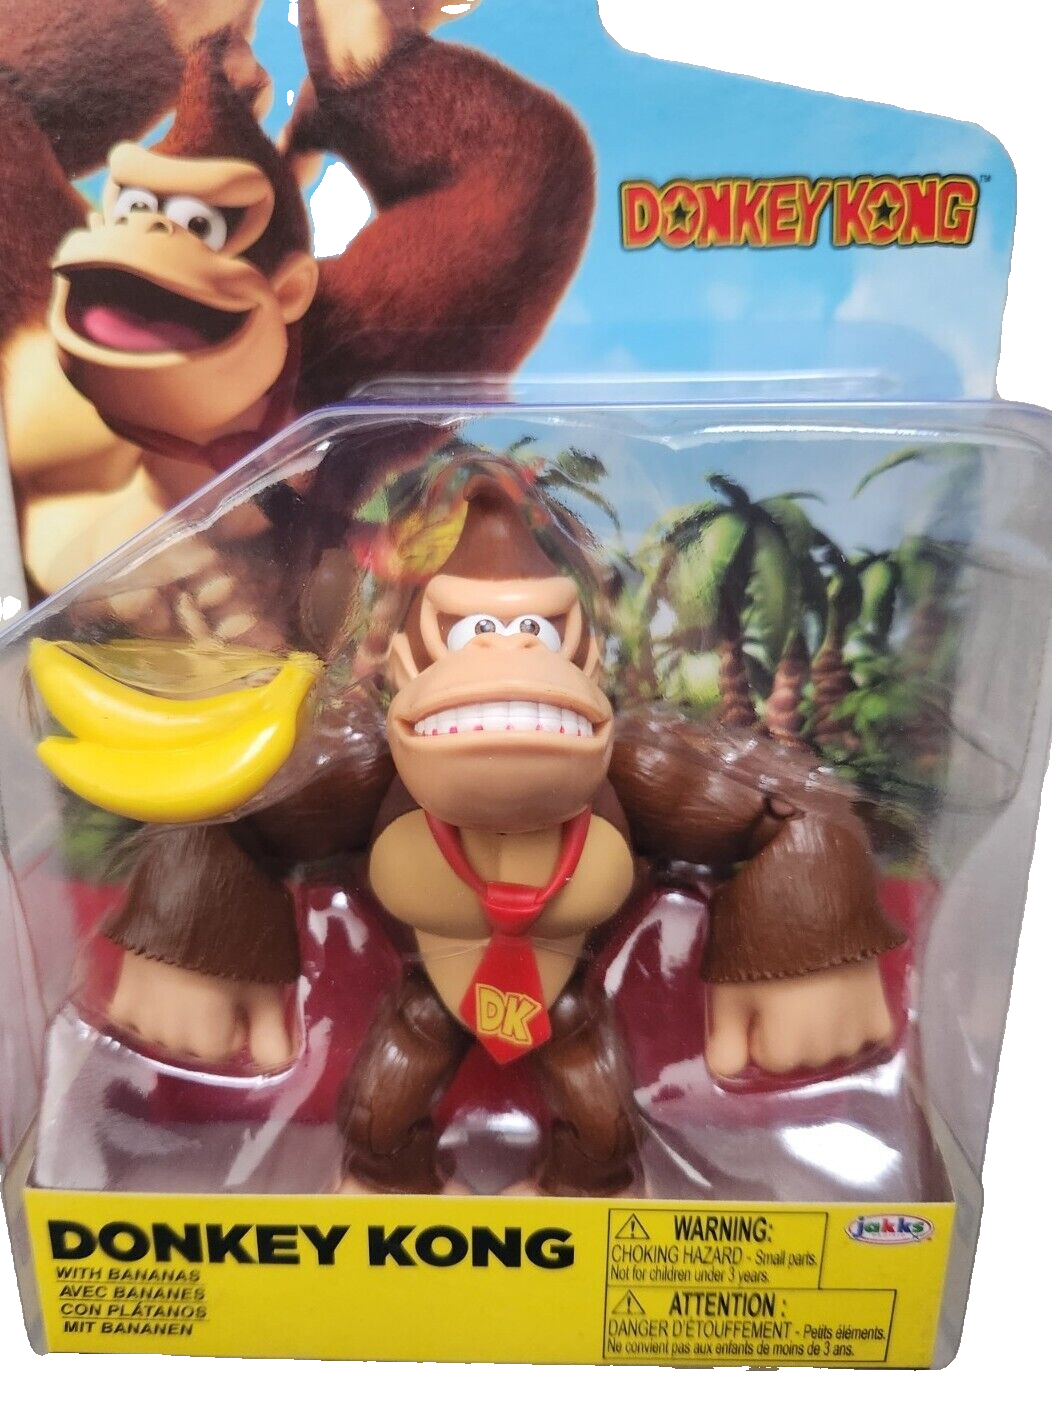 Donkey Kong with Bananas + Diddy Kong  with Barrel 4" Nintendo Jakks Pacific JAKKS Pacific JAKKS Pacific 4 Inch World Of Nintendo Donkey & Diddy Kong - фотография #3